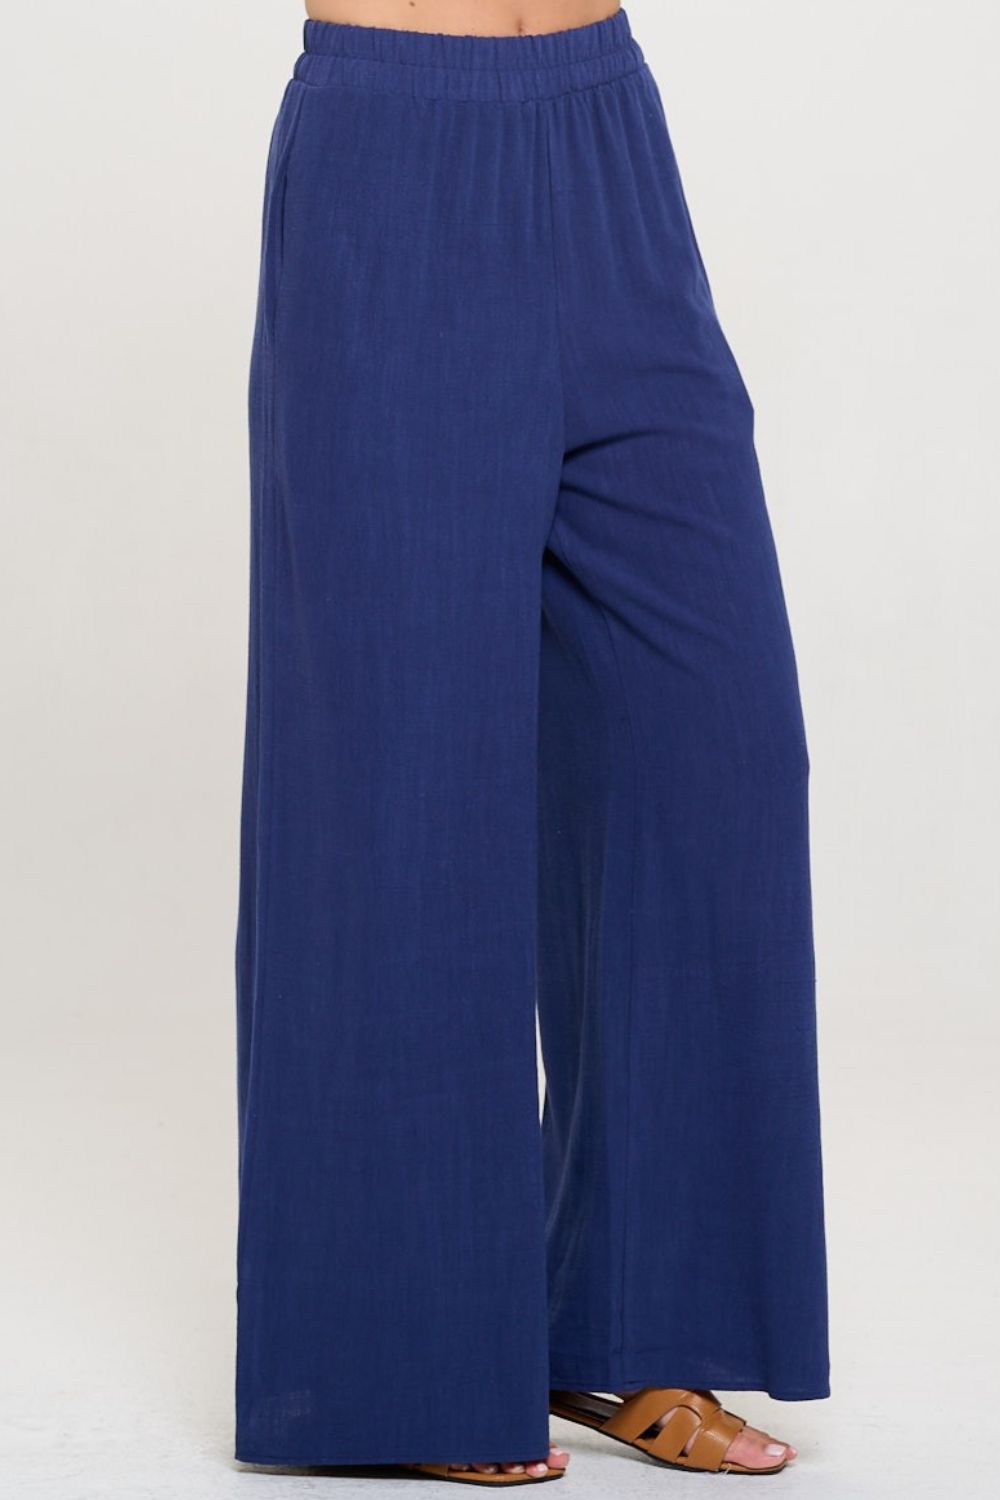 These linen wide leg pants are stylish  S - Land functional with the added convenience of pockets. Made from breathable linen fabric, they are perfect for keeping cool and comfortable during warm weather. The wide leg design adds a touch of elegance while allowing for ease of movement. 